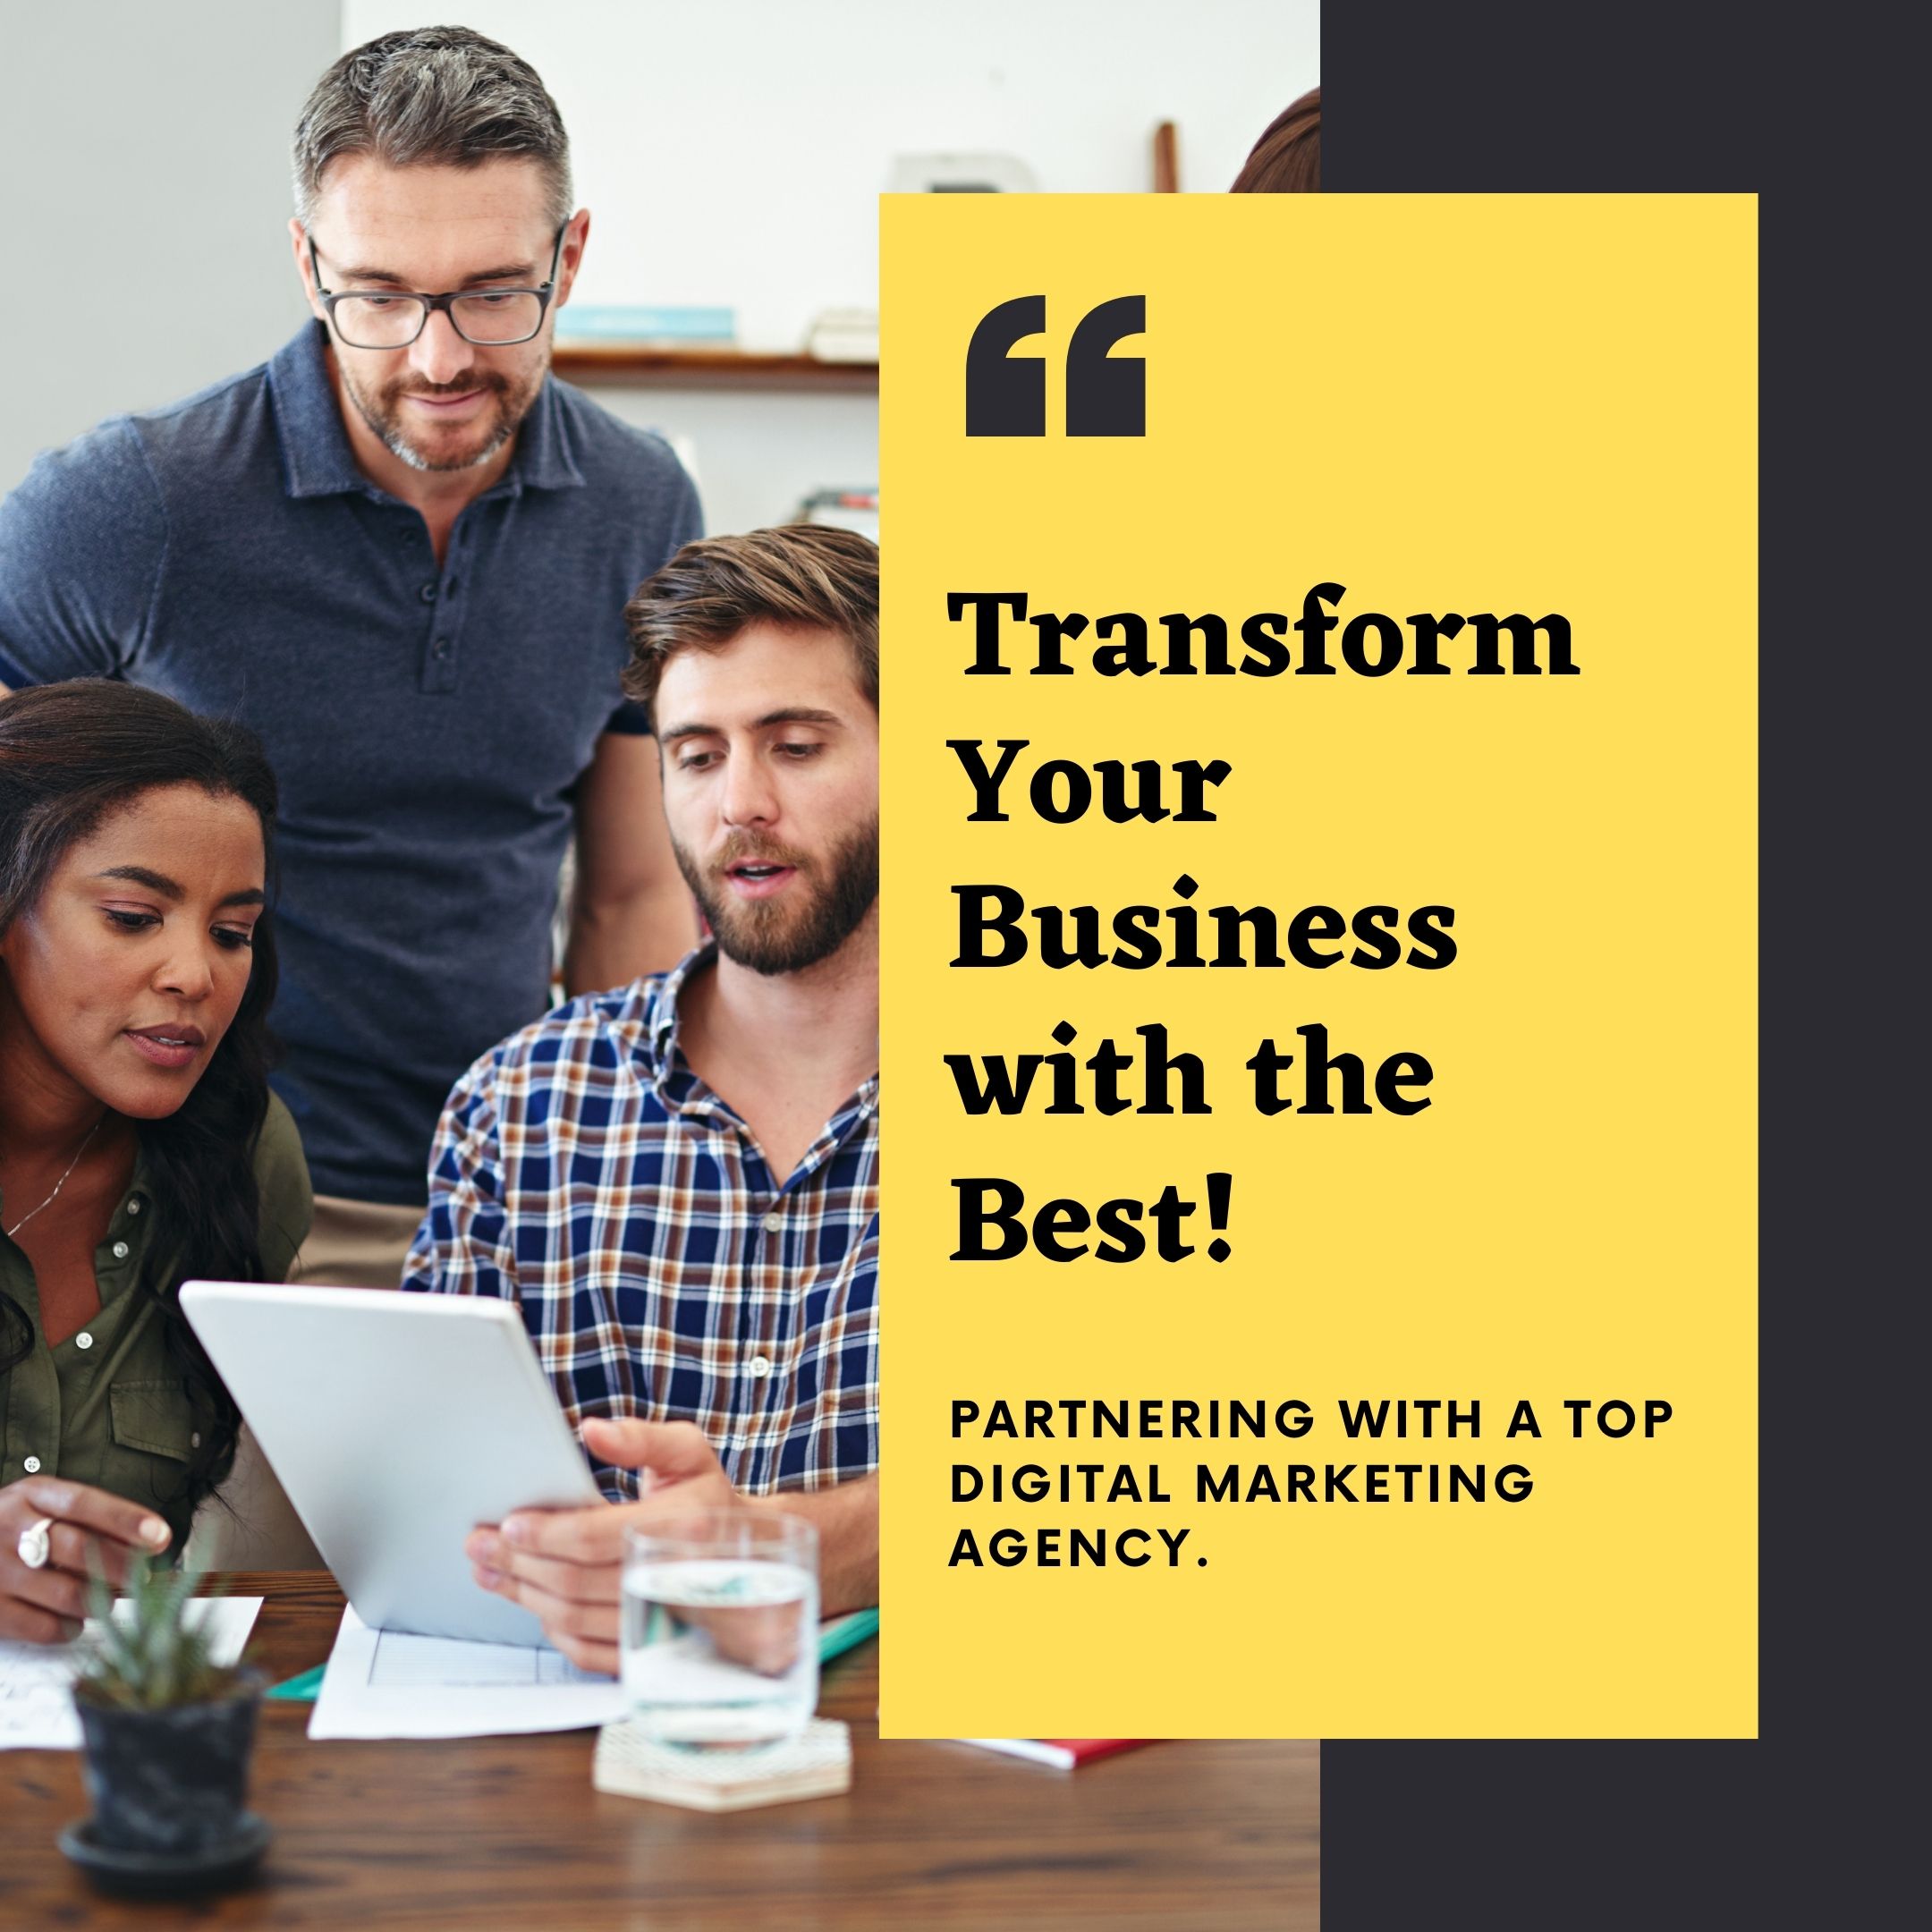 Transform Your Business with the Best!